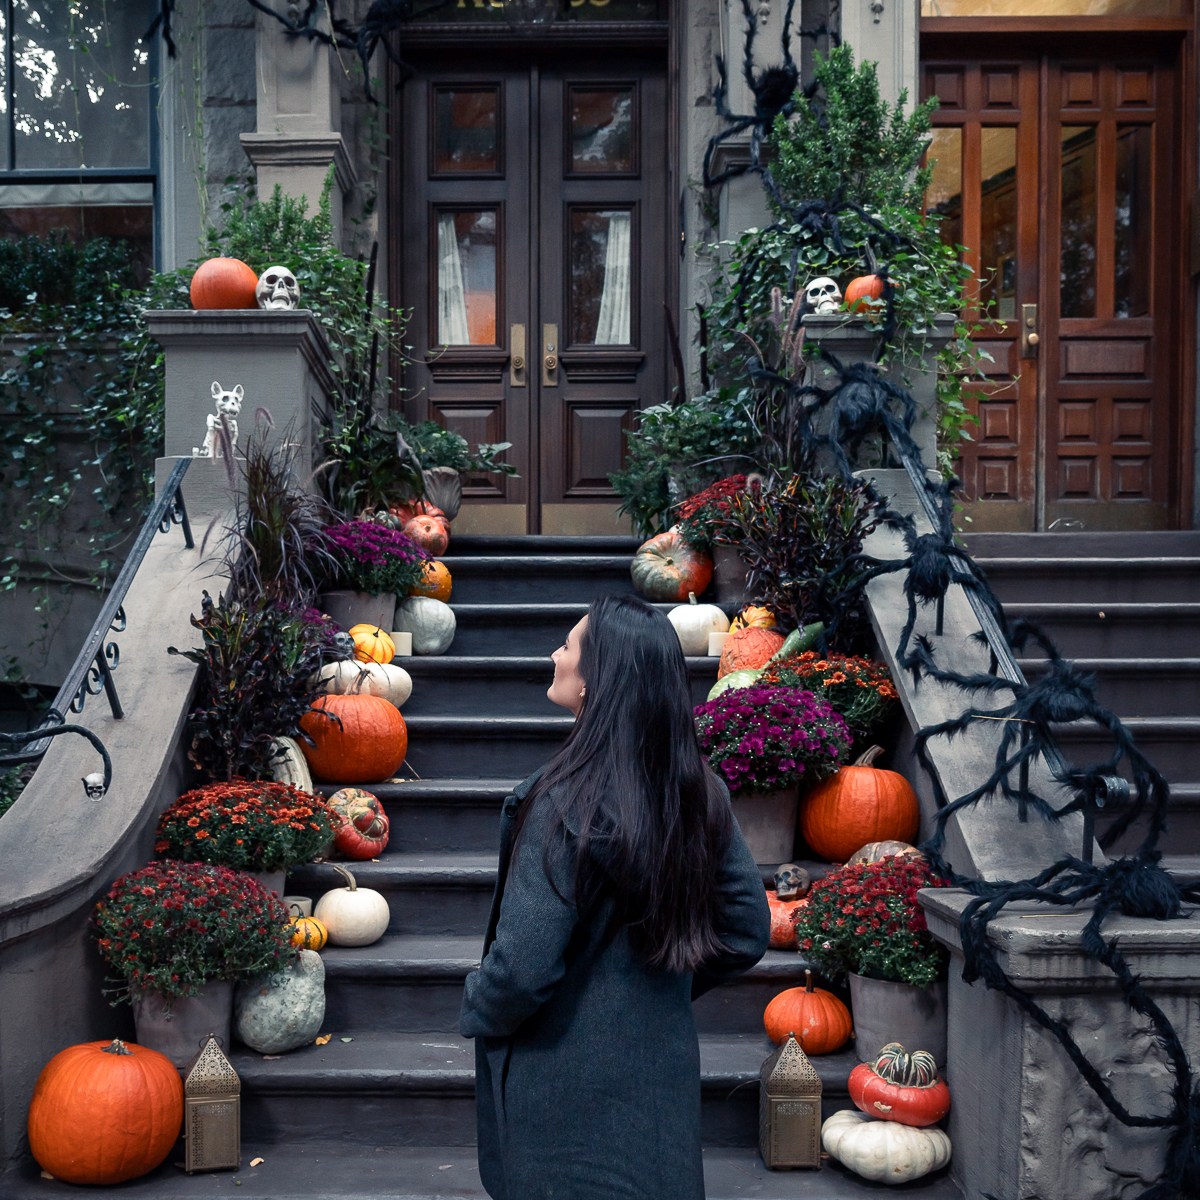 It's easy to find Halloween decorations in NYC since residents get into the holiday spirit.